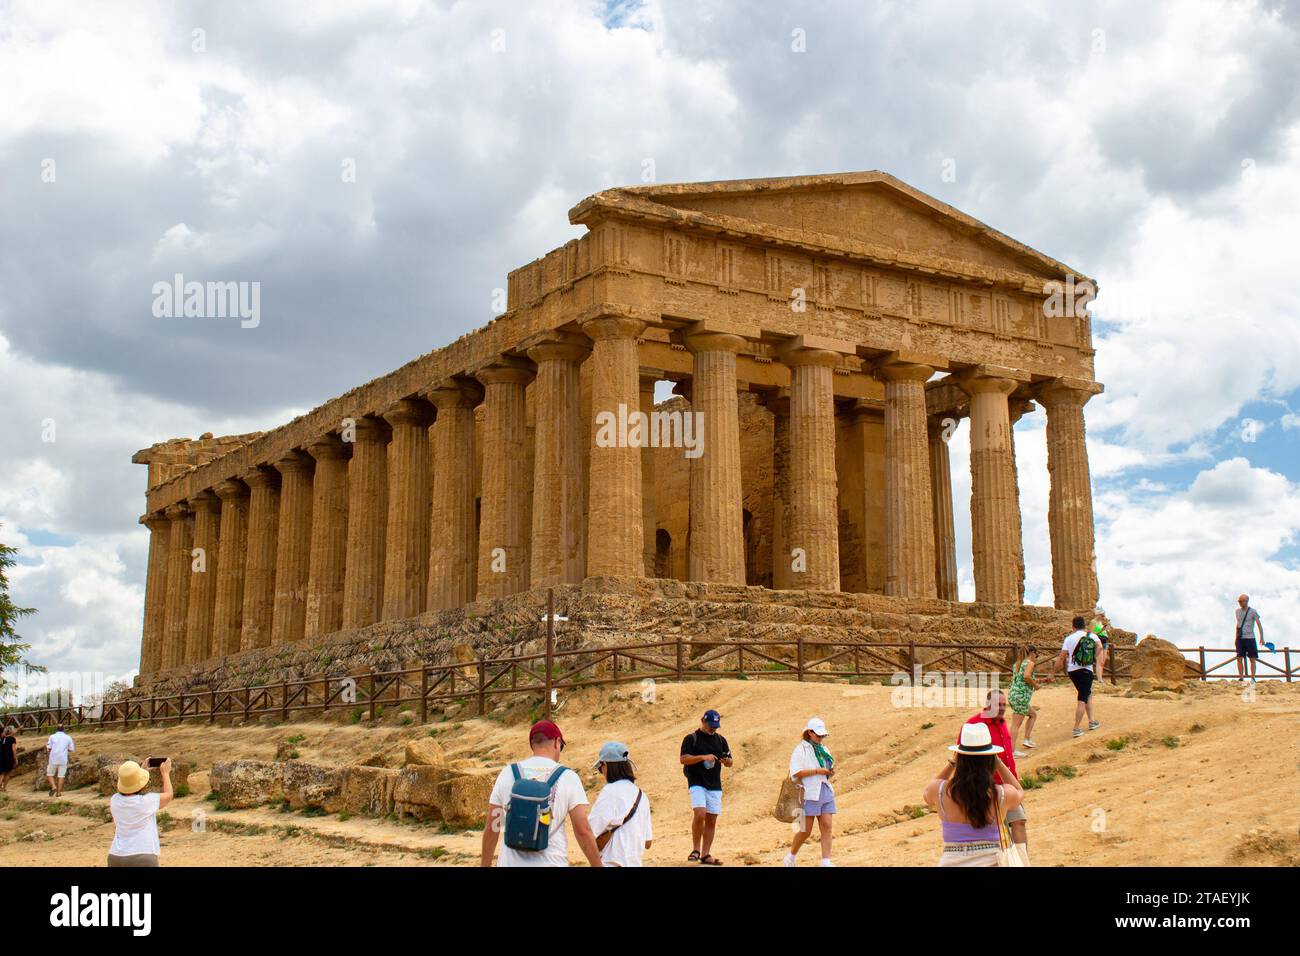 Daytime images of the Valley of the Temples in Agrigento, Sicily. Sunny day with clouds at noon. Greek archeological architecture Stock Photo